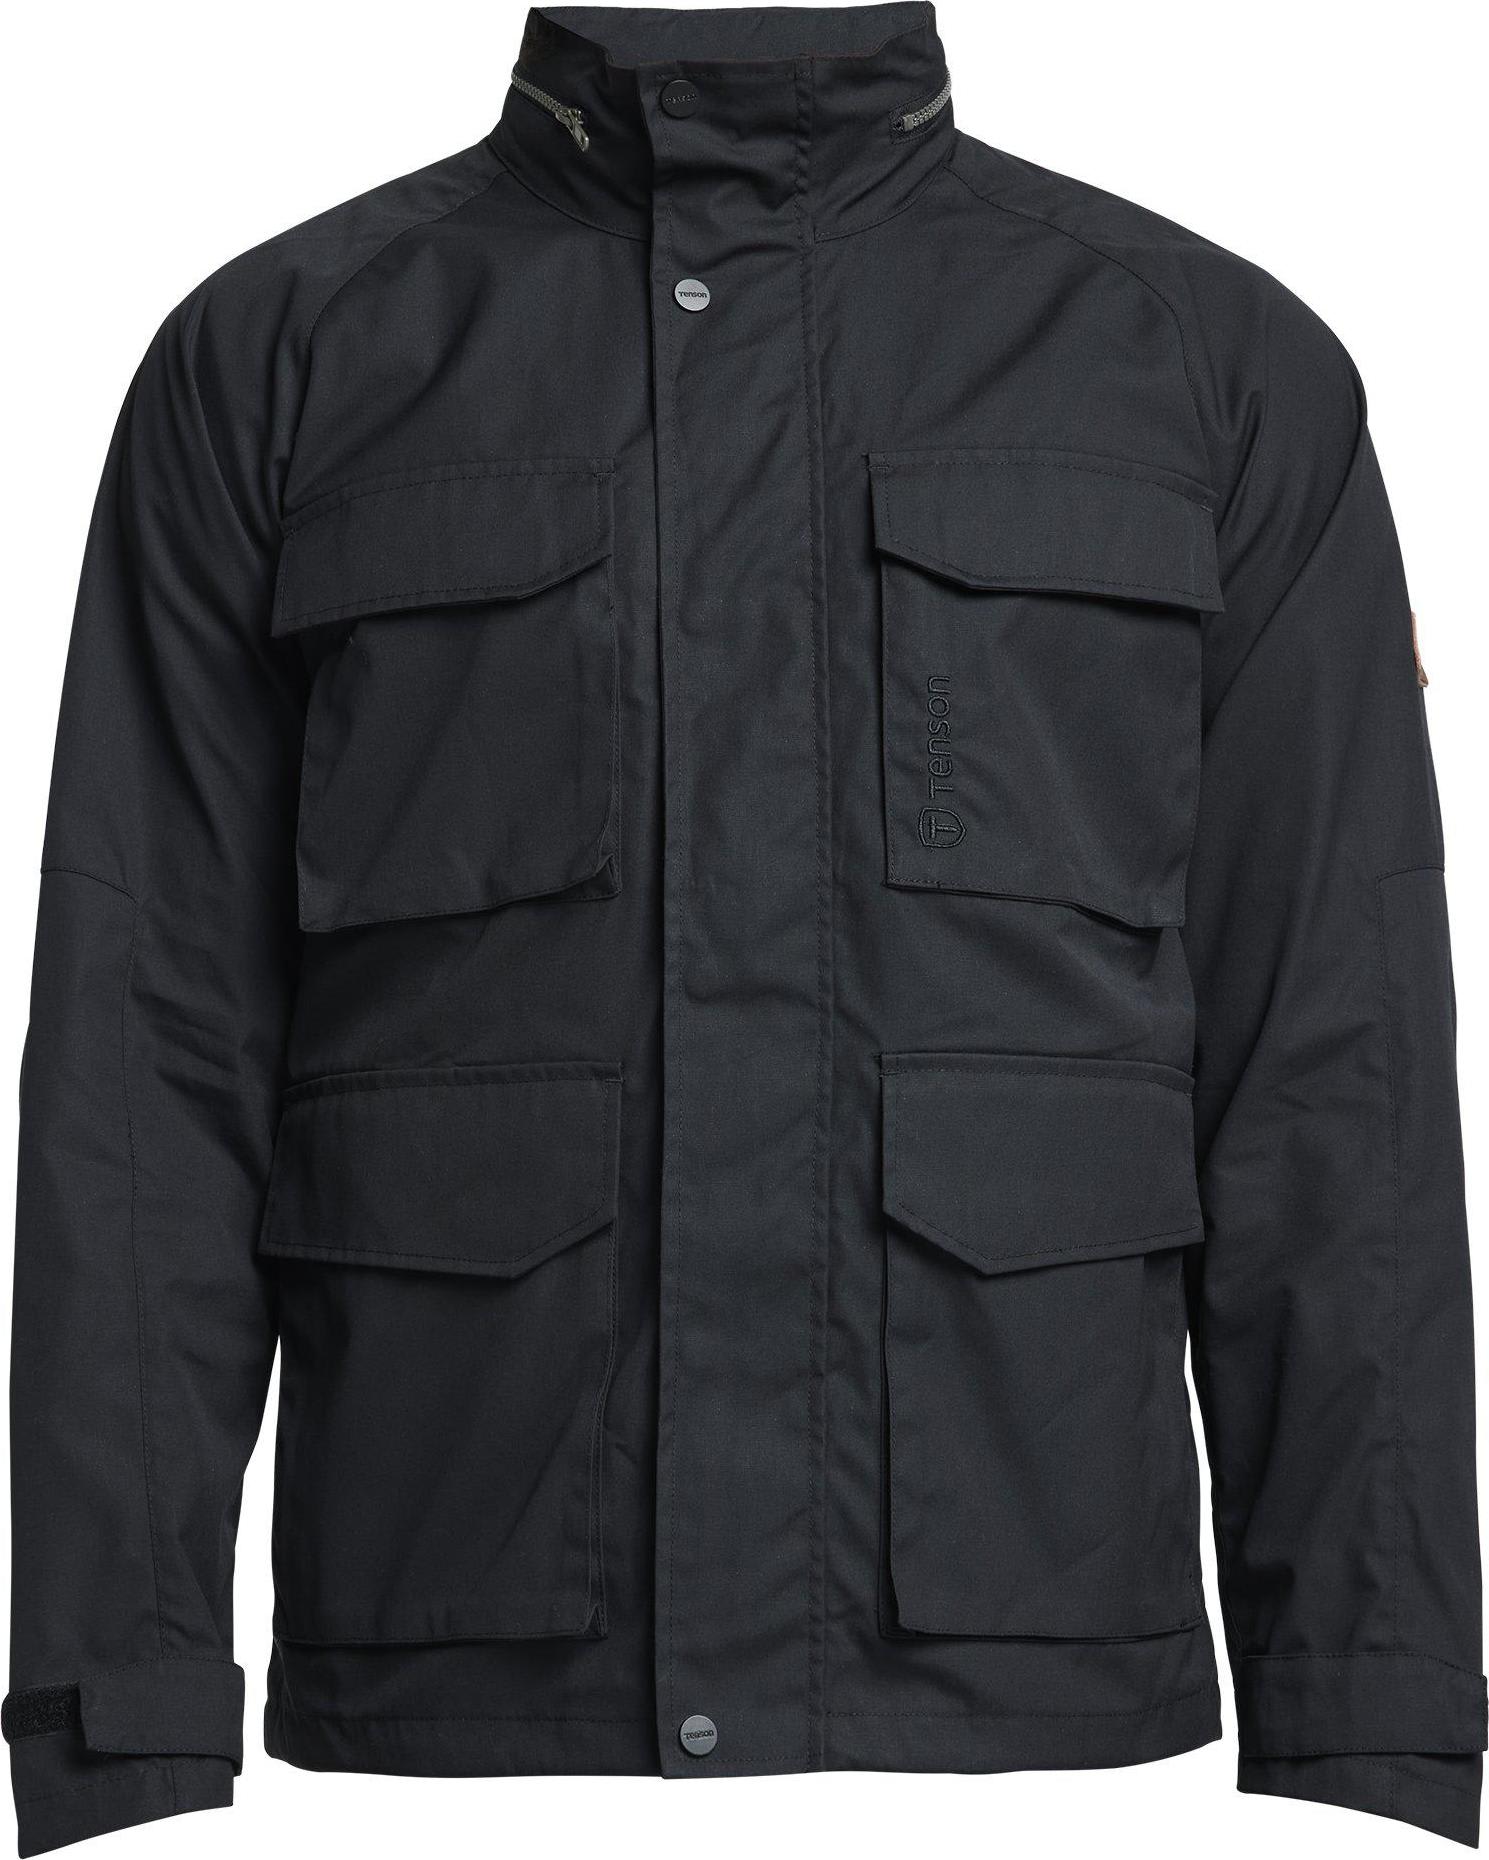 Buy Men's MT Robson Jacket from Outnorth